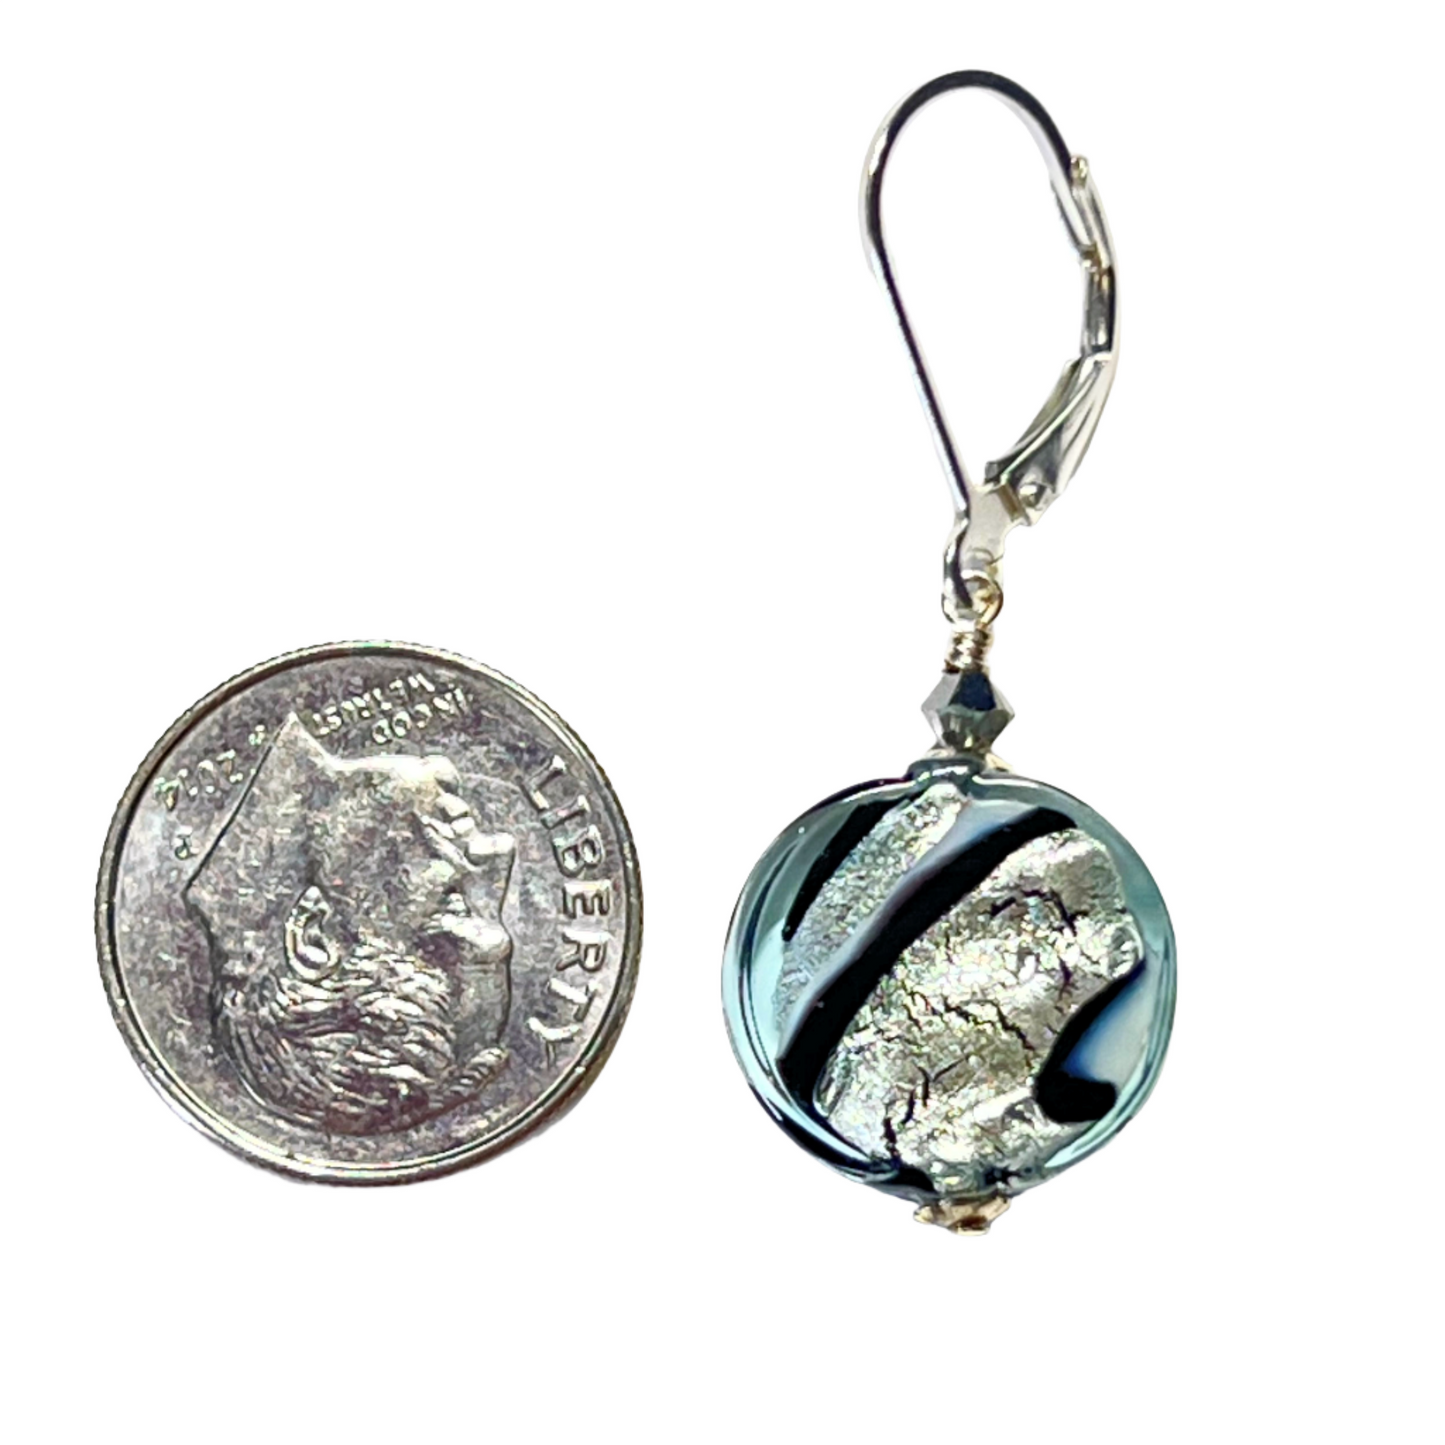 Murano Glass Black White Coin Earrings - Sterling Silver | Unique Gift for Her